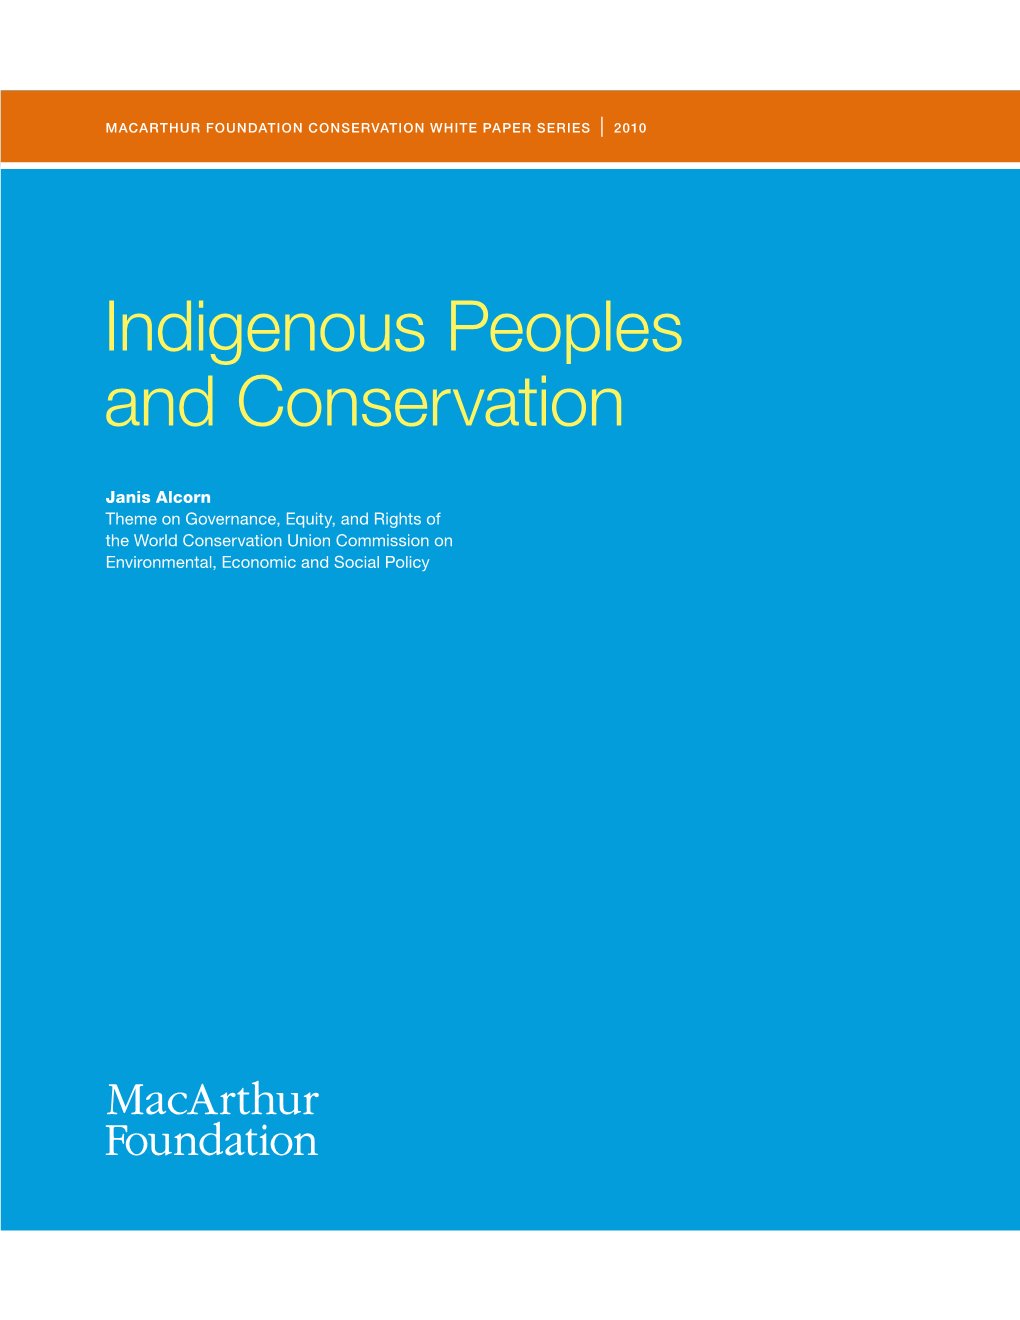 Indigenous Peoples and Conservation